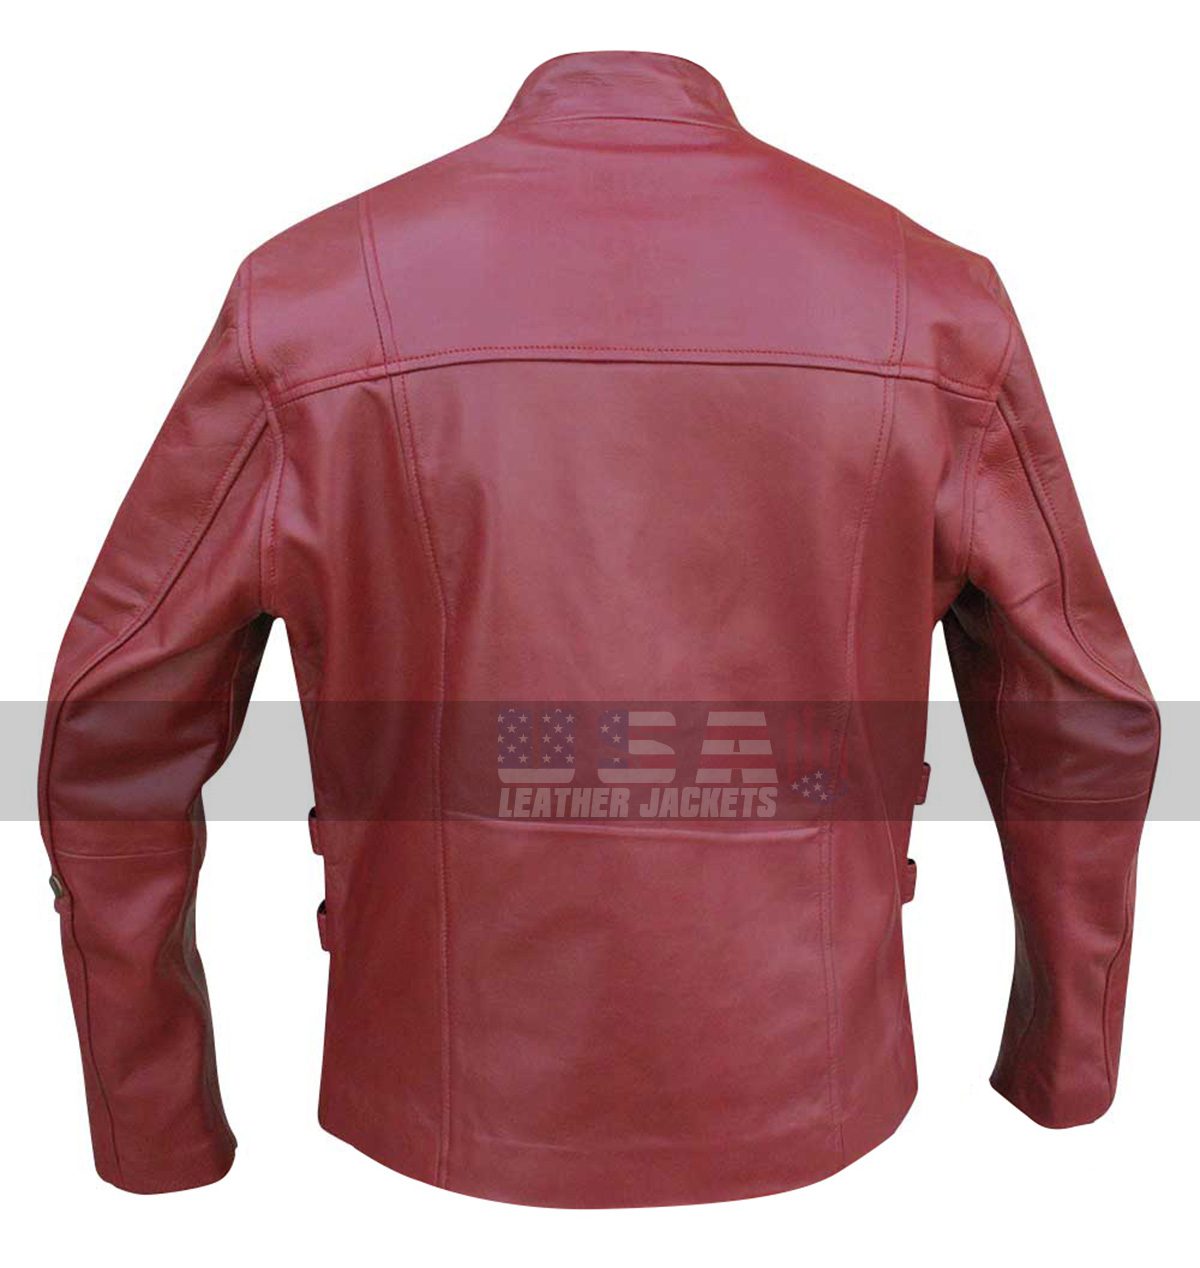 Guardians of the Galaxy Star Lord Peter Quill for Unisex Jacket